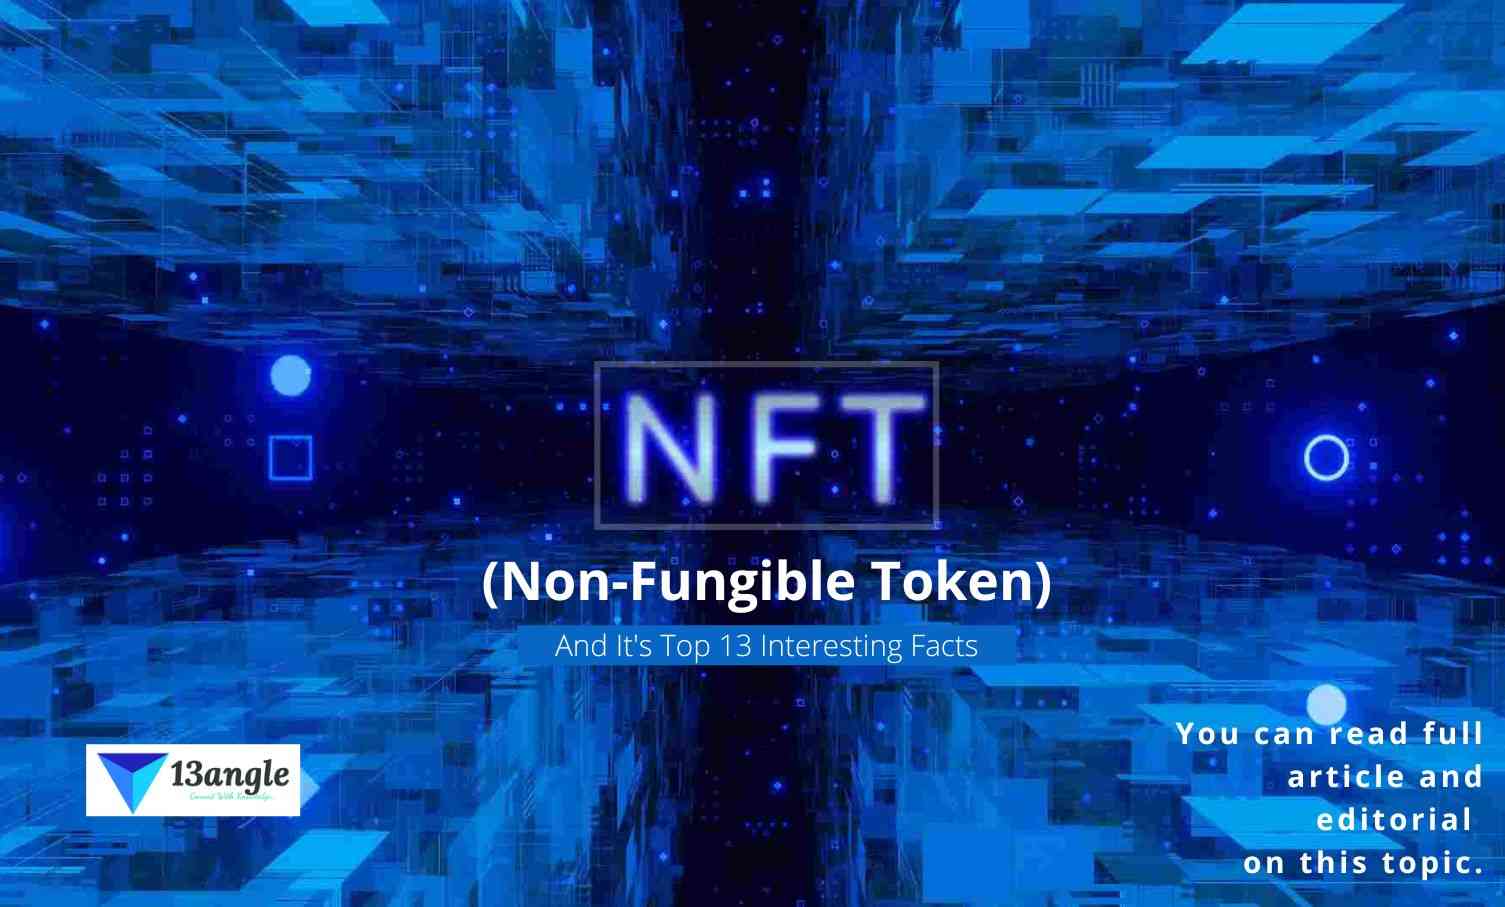 Non-Fungible Token And It's Top 13 Interesting Facts- 13angle.com